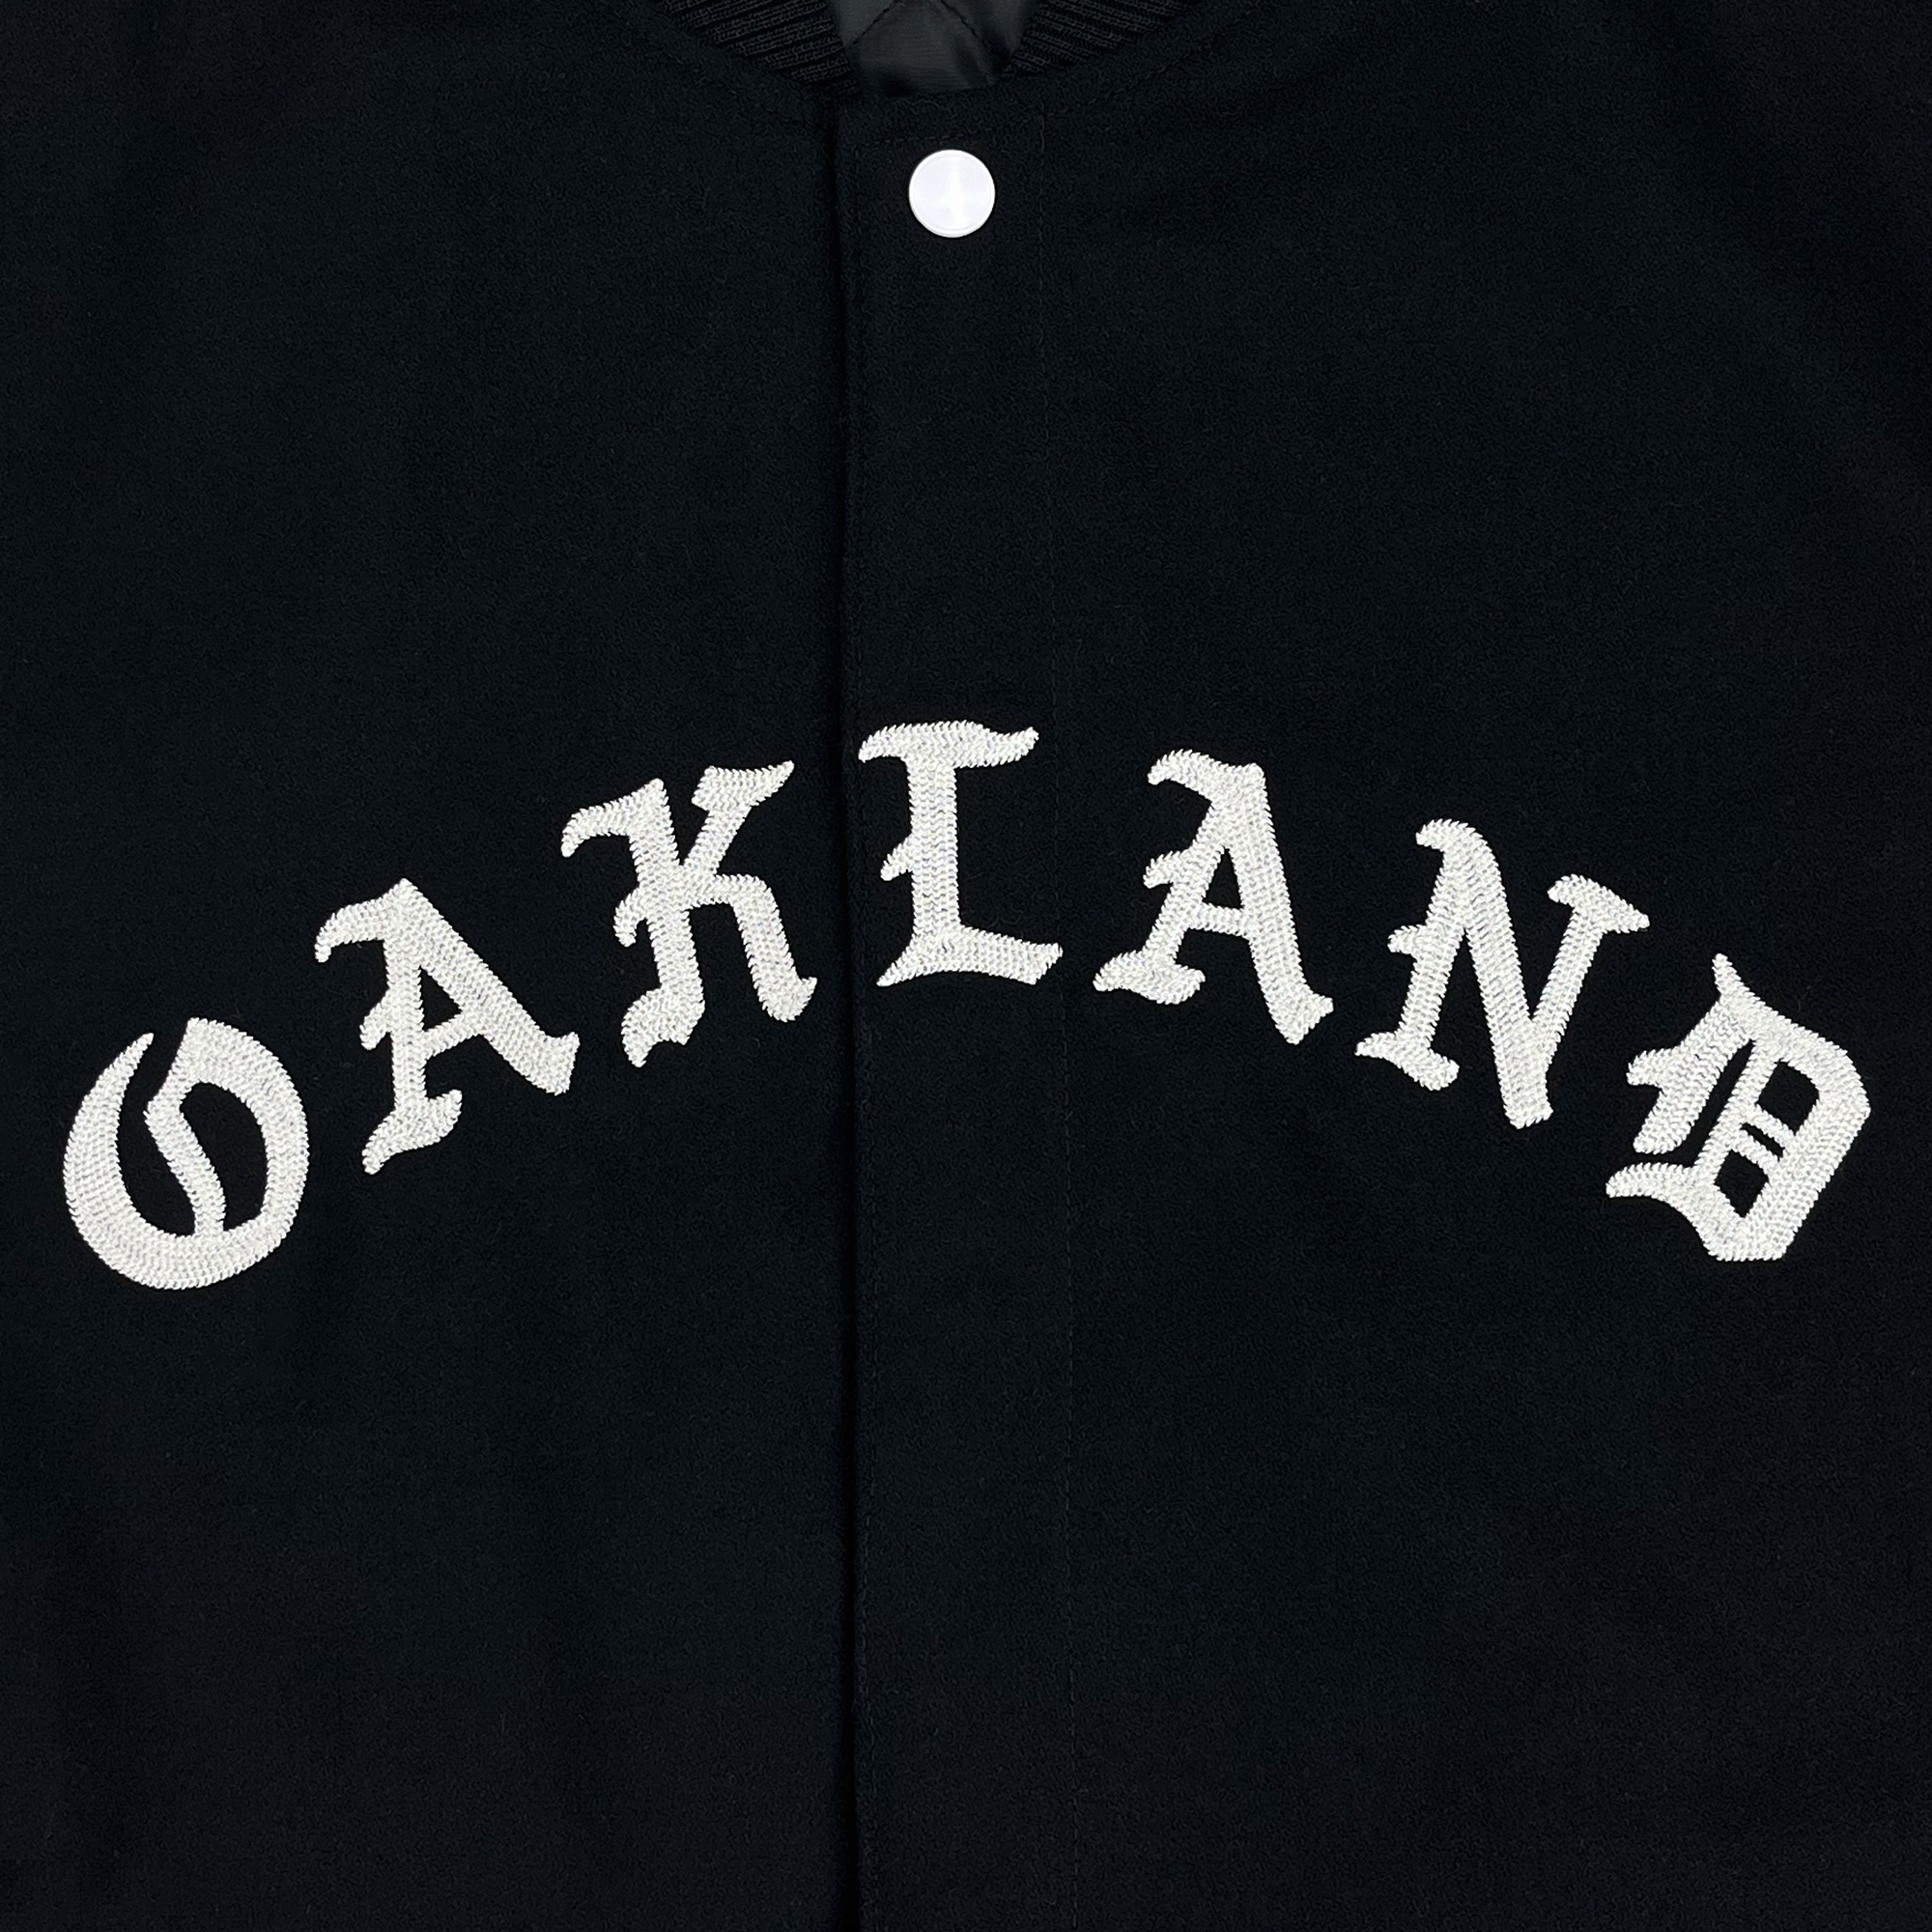 Large embroidered OAKLAND wordmark on the front chest of a black and white varsity jacket.